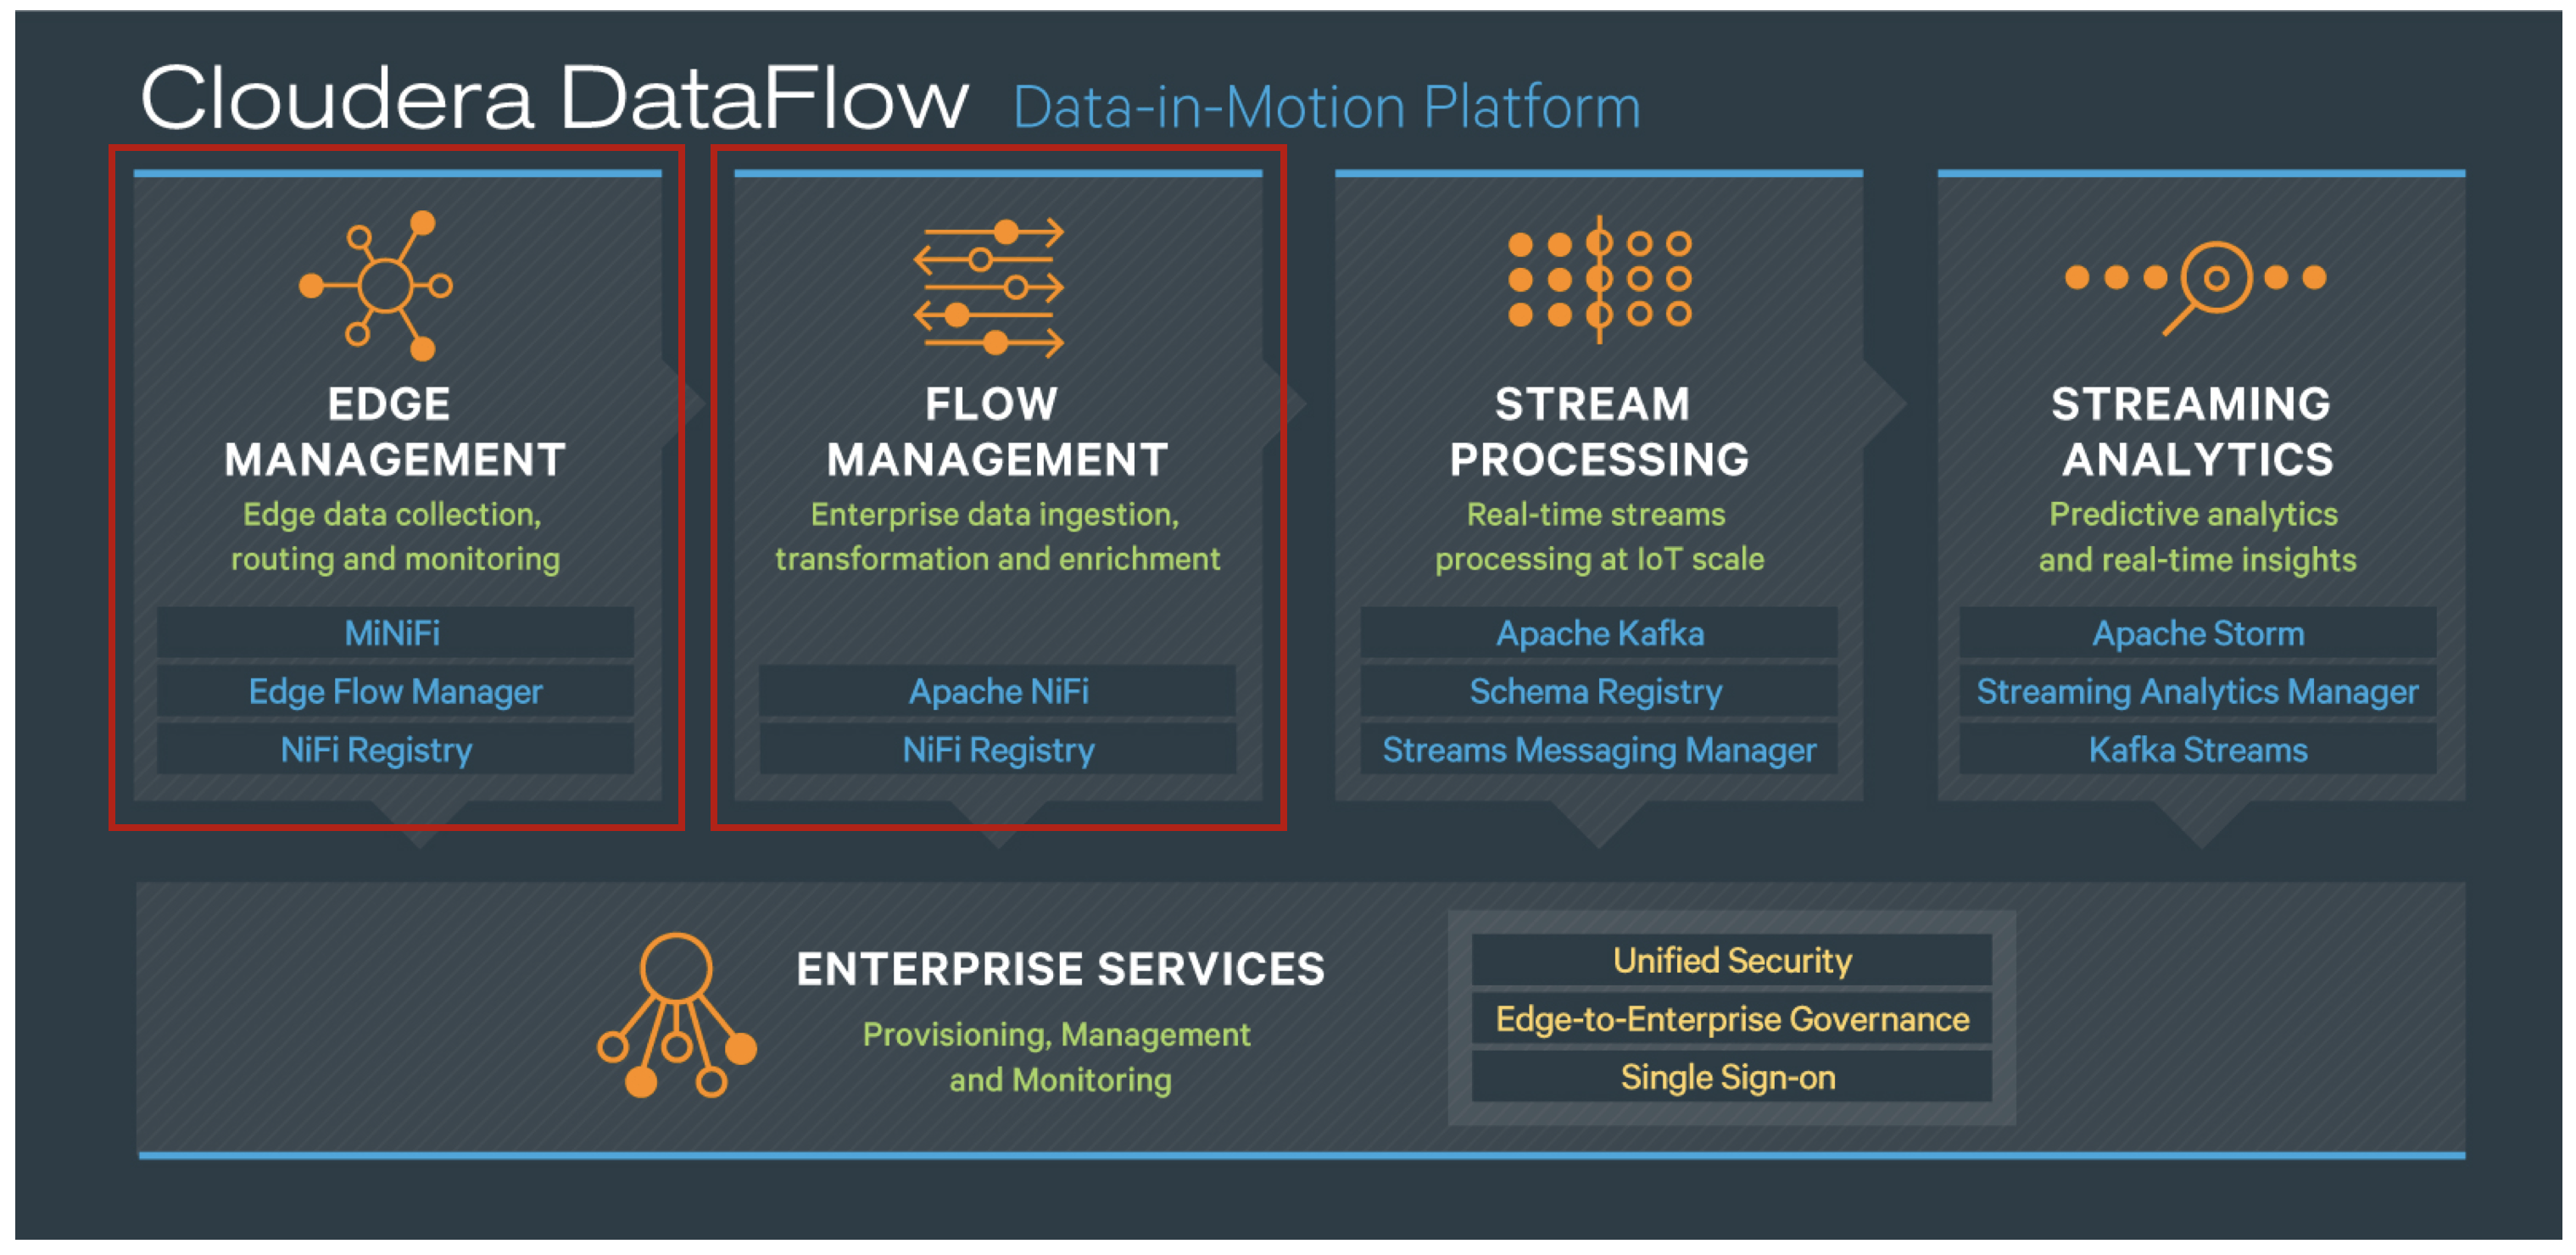 Cloudera DataFlow products